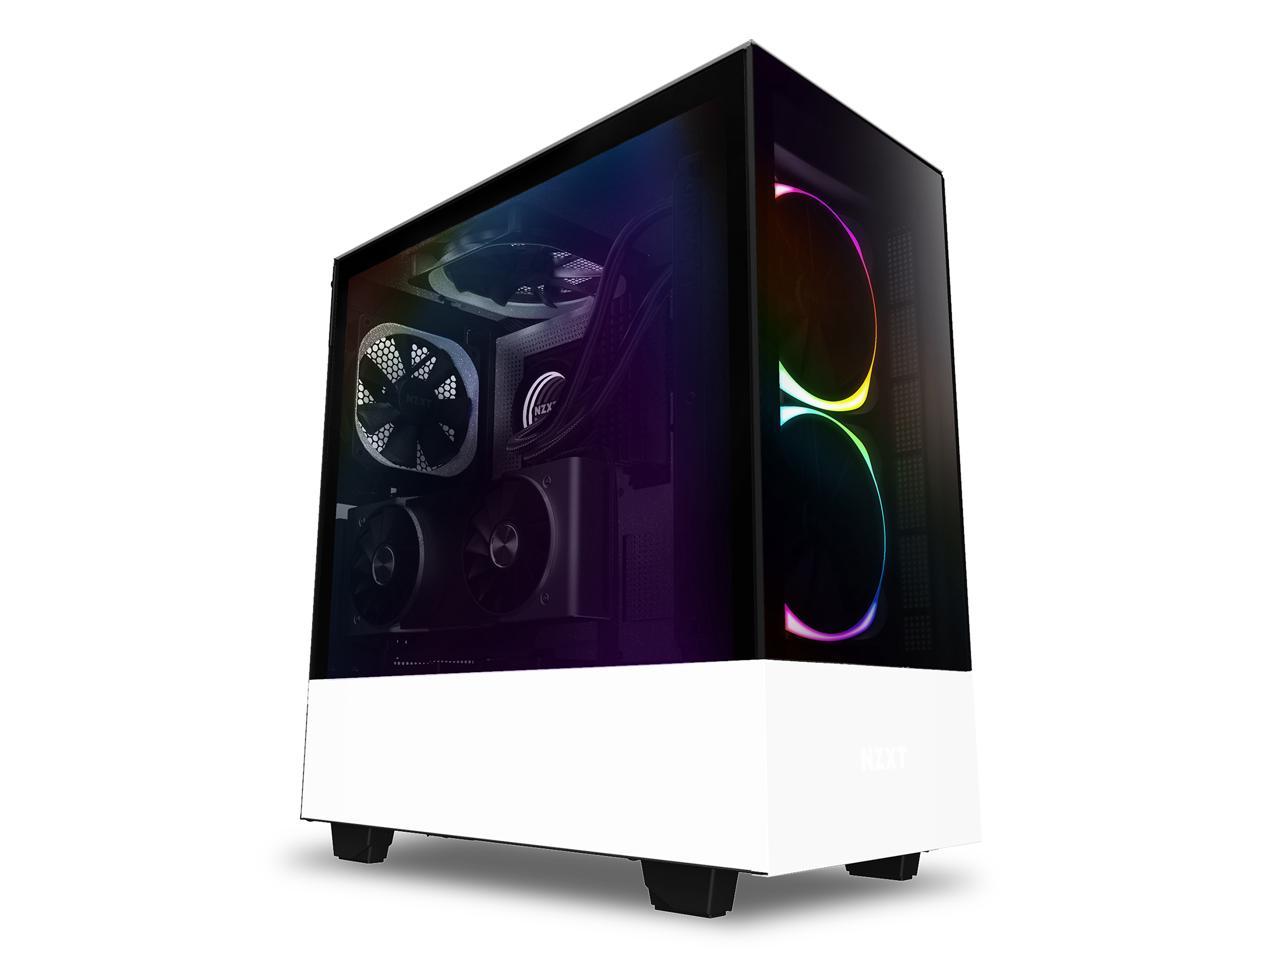 NZXT H510 Elite - Premium Mid-Tower ATX Case PC Gaming Case - Dual-Tempered Glass Panel - Front I/O USB Type-C Port - Vertical GPU Mount - Integrated RGB Lighting - Water-Cooling Ready - White/Black, CA-H510E-W1